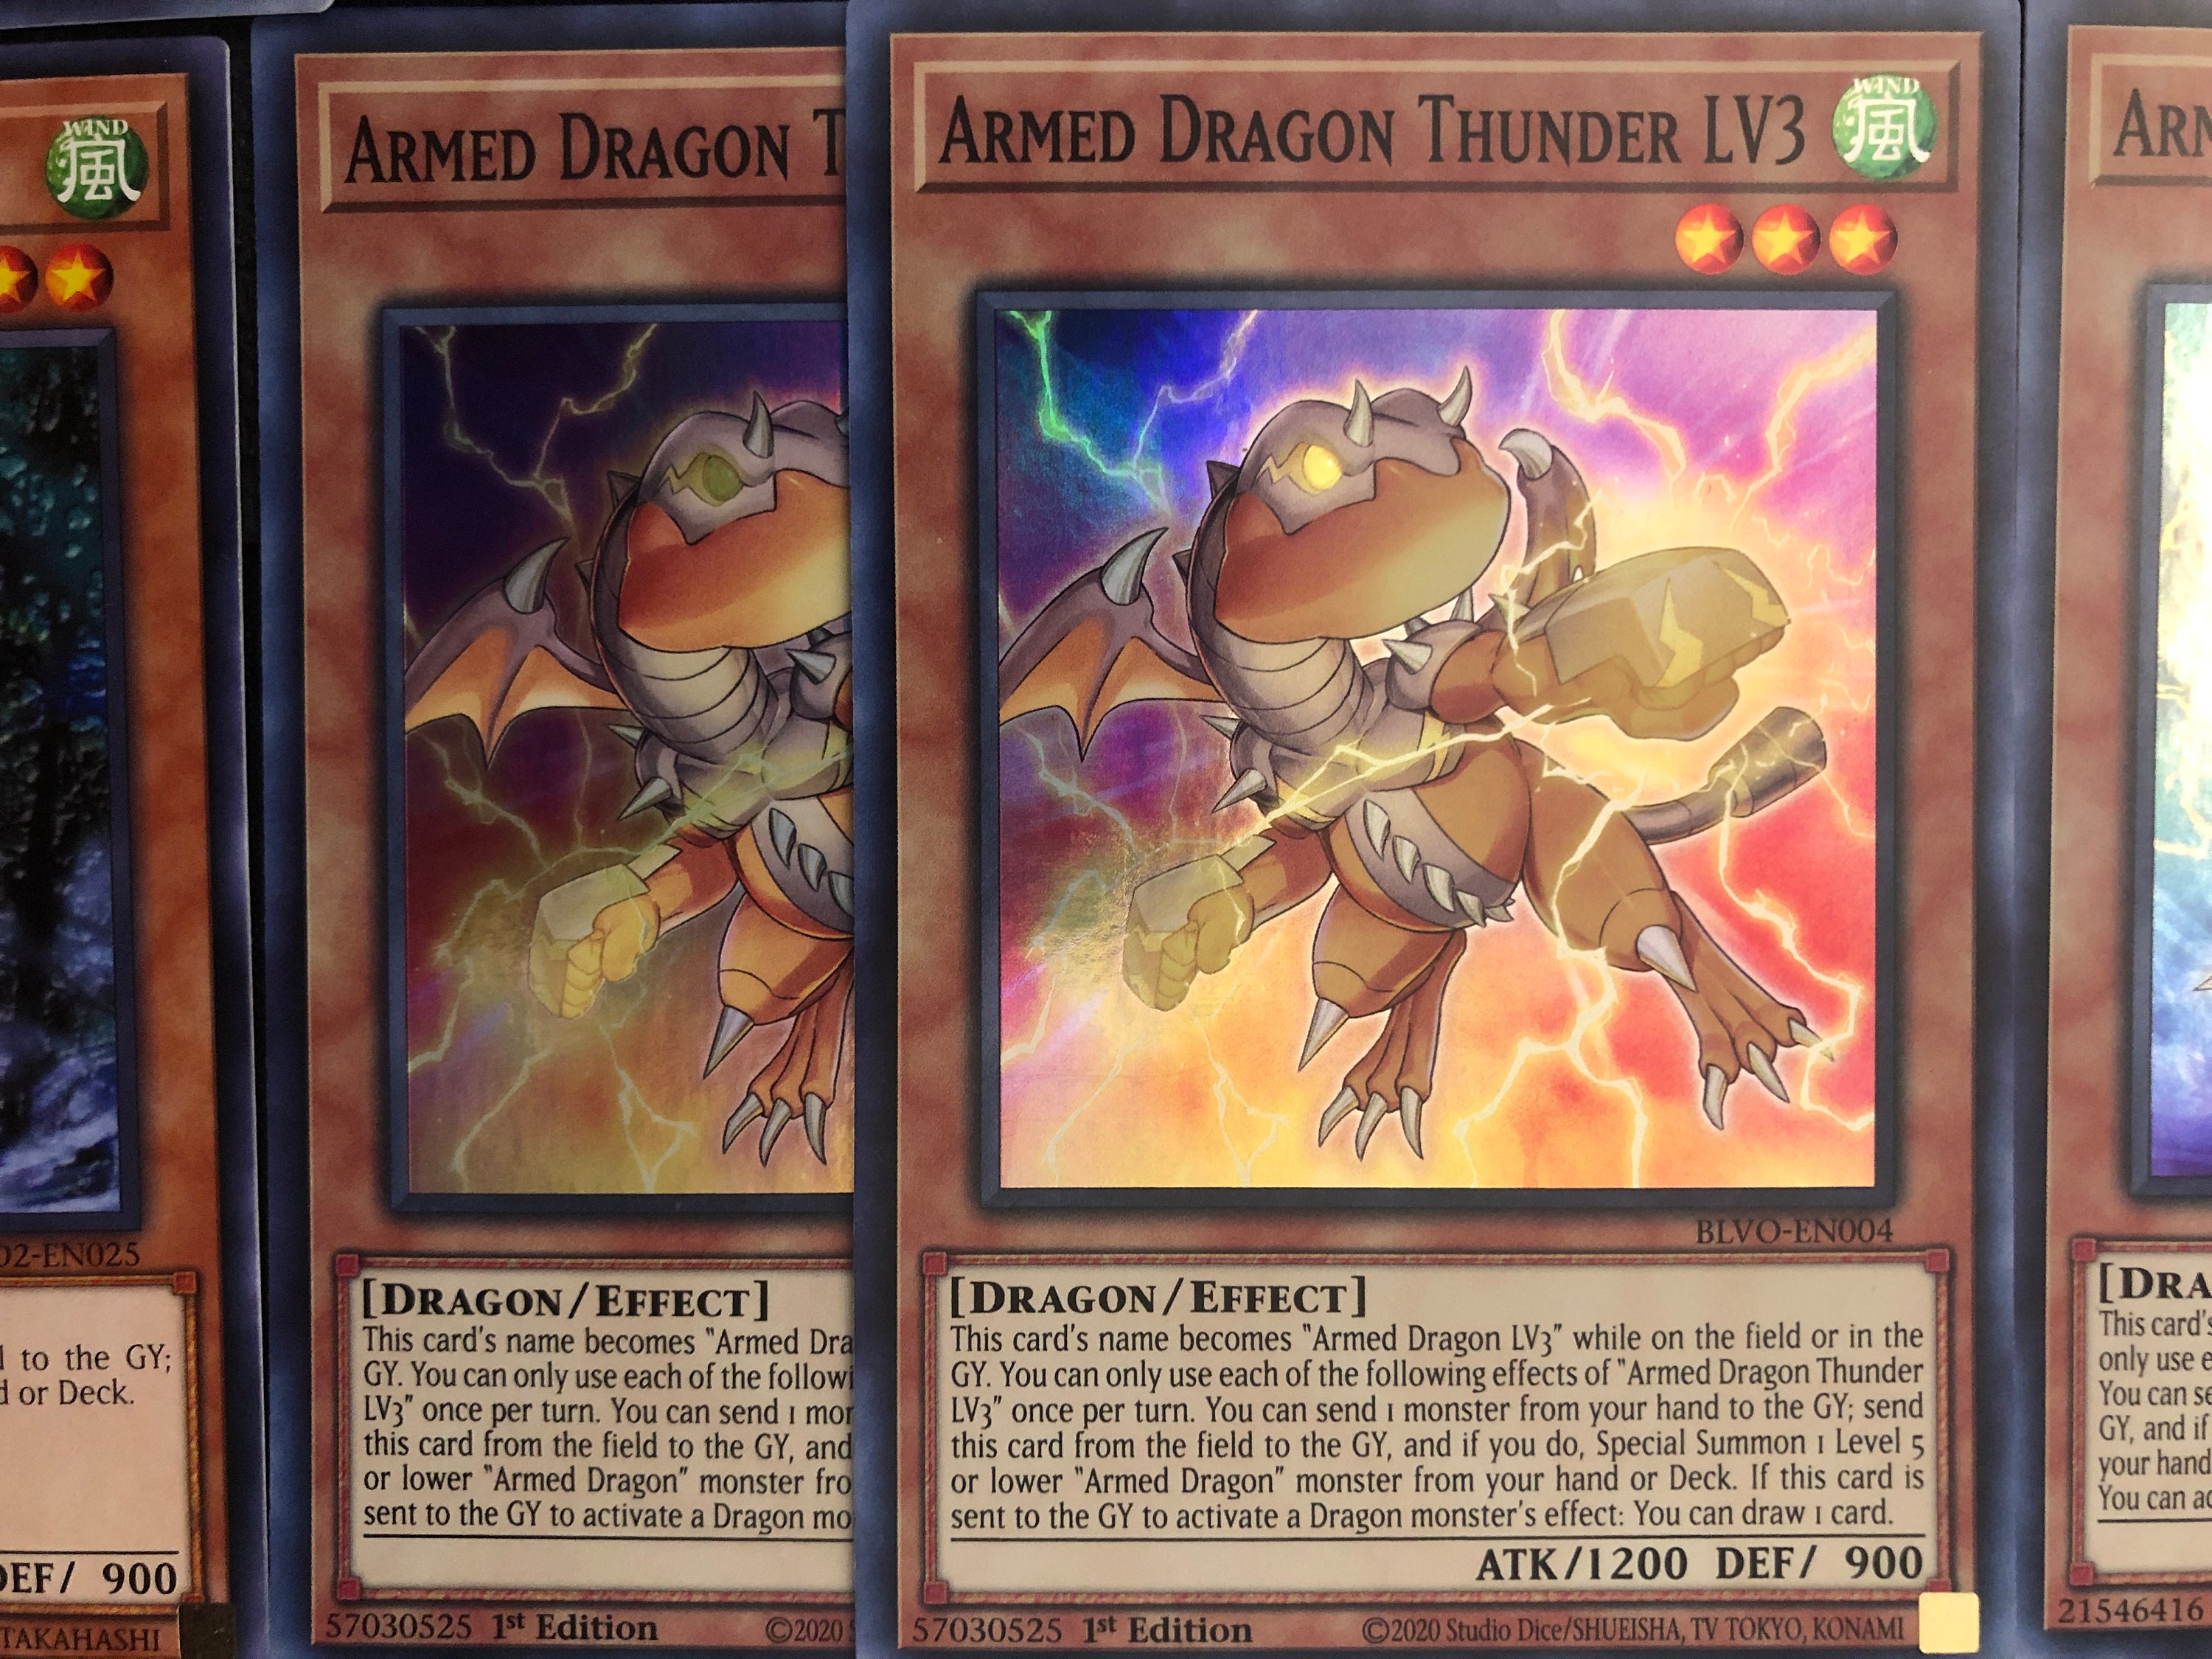 BLVO] Armed Dragon Thunder is the cover!